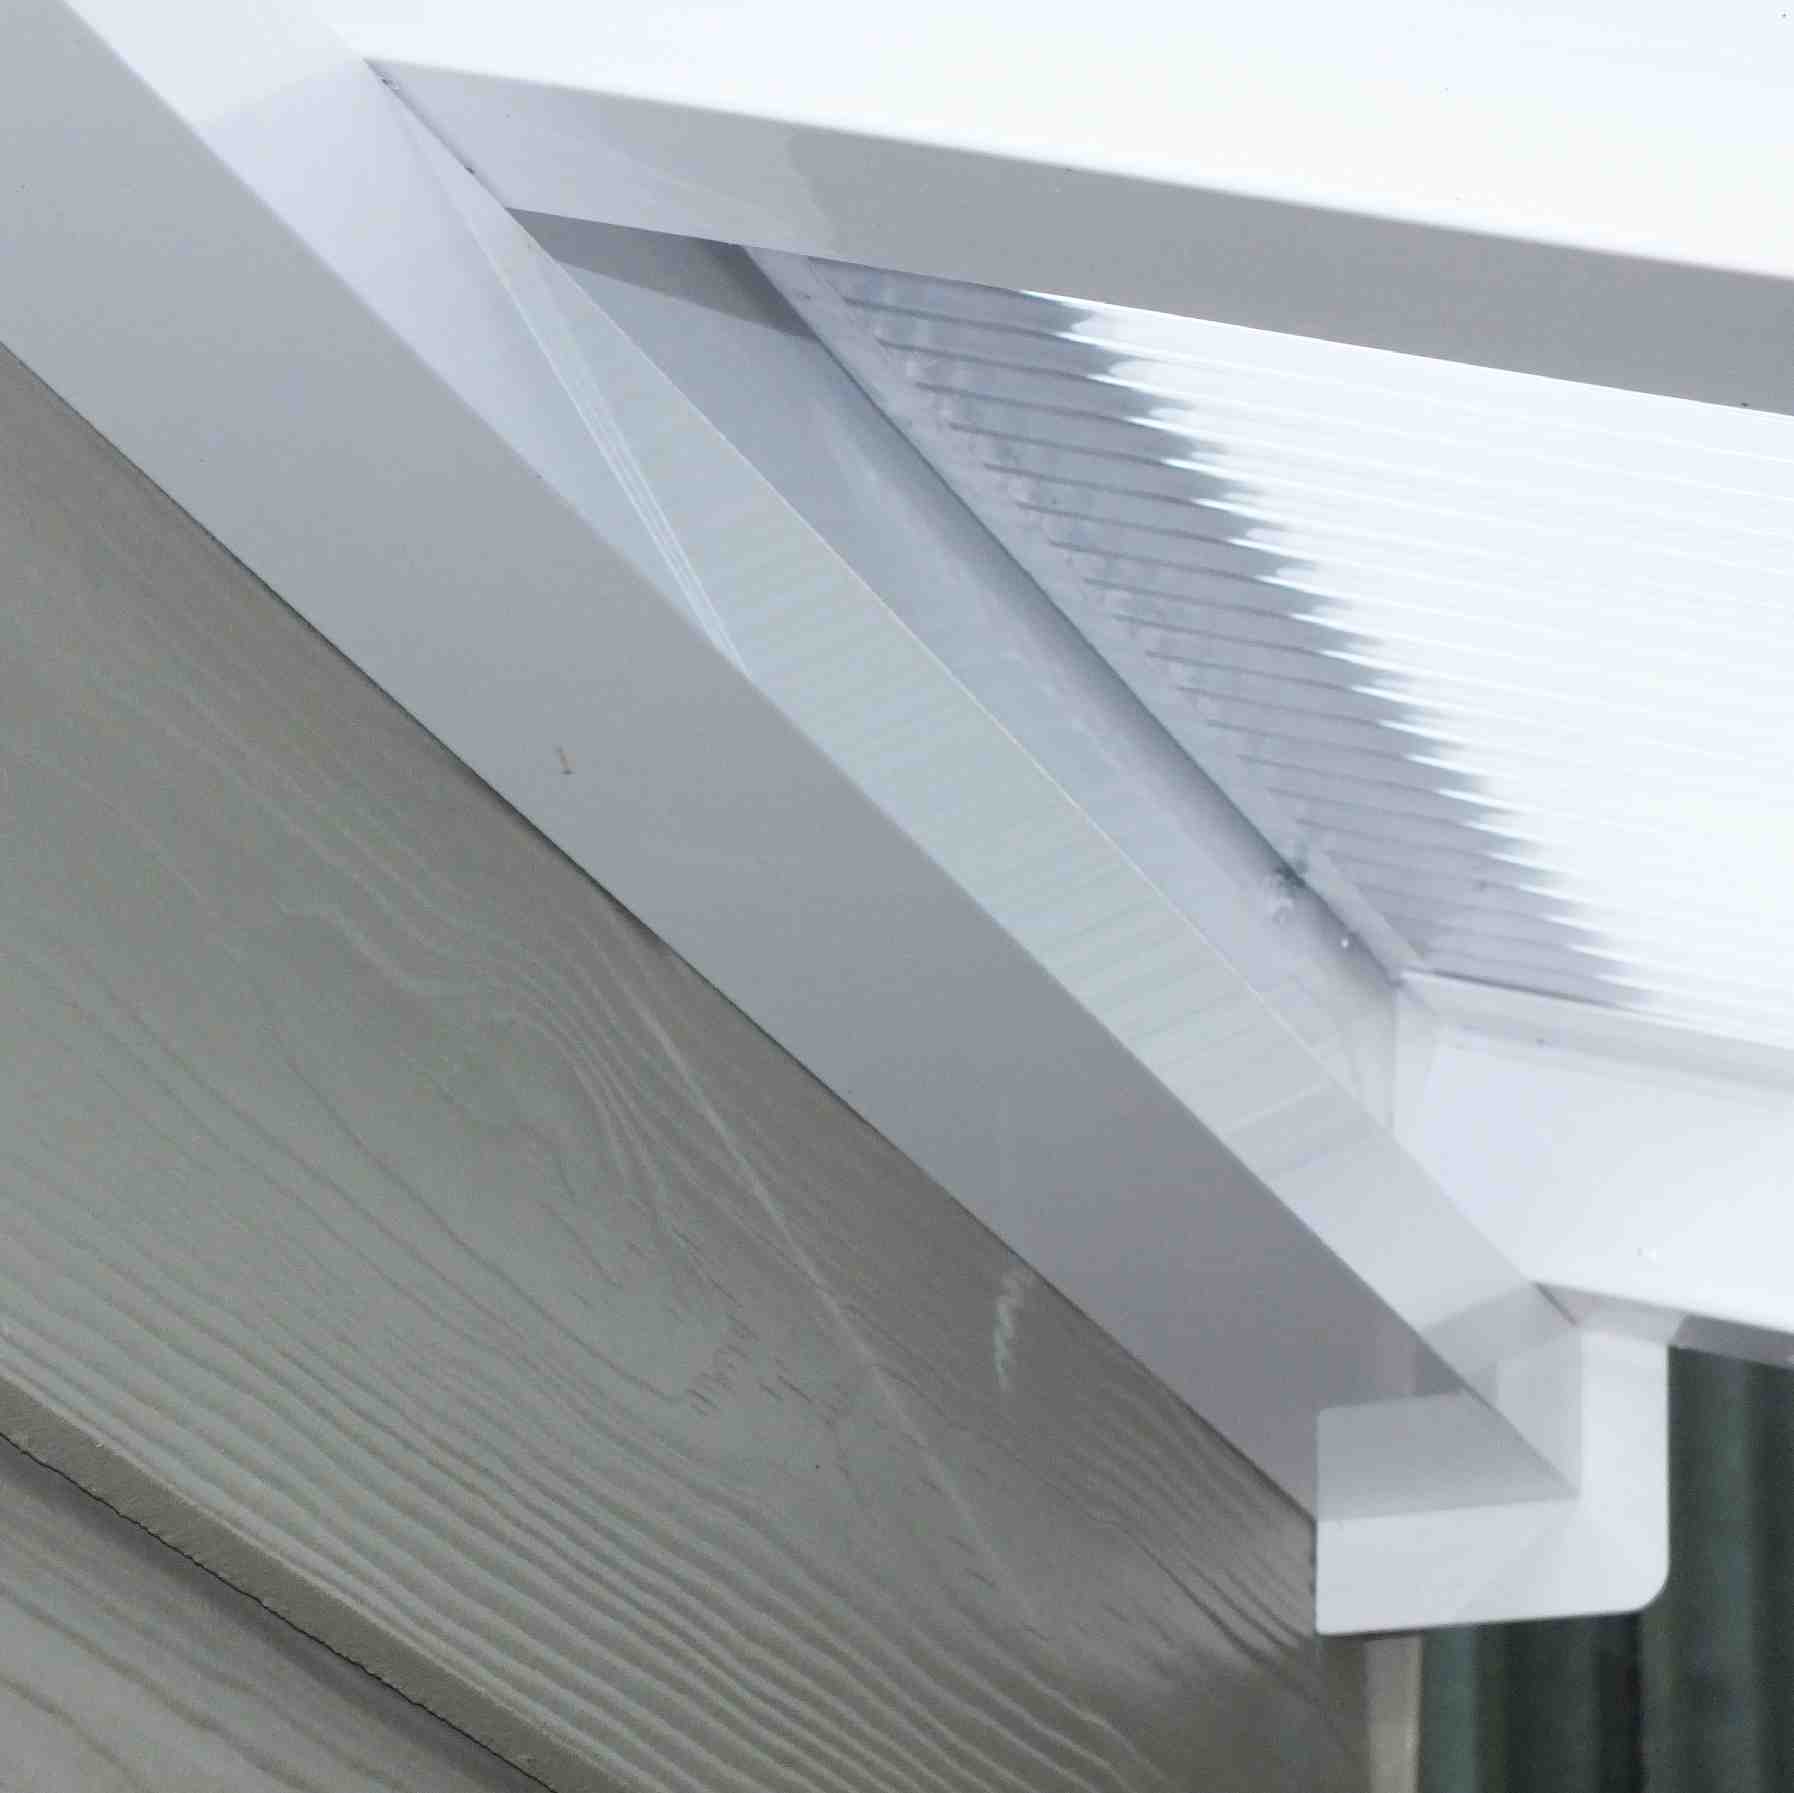 Great deals on Omega Verandah White with 16mm Polycarbonate Glazing - 7.4m (W) x 2.0m (P), (4) Supporting Posts